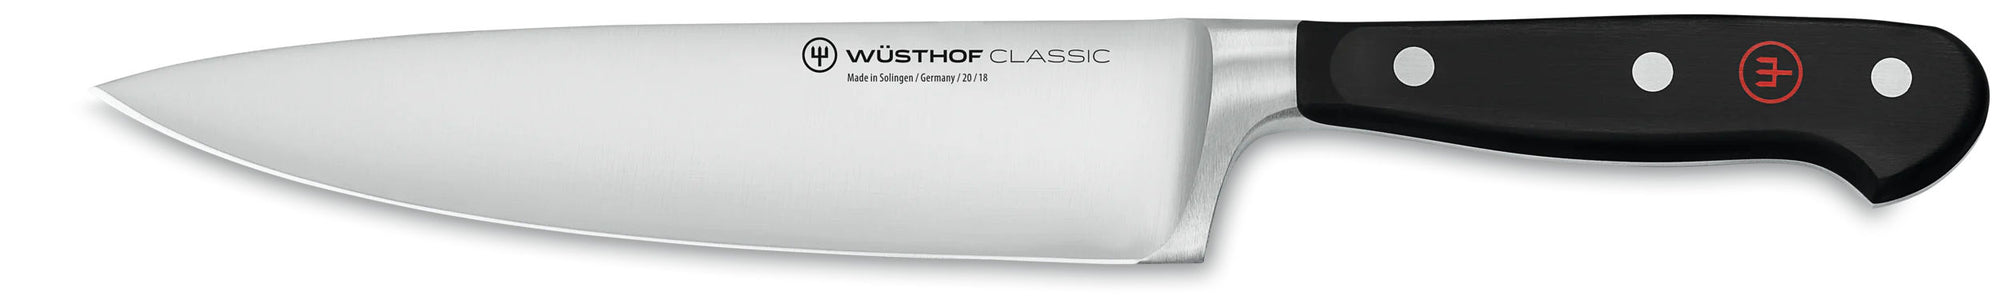 Wusthof Classic Cook's Knife, 7-inch (18 cm) - 4582-18